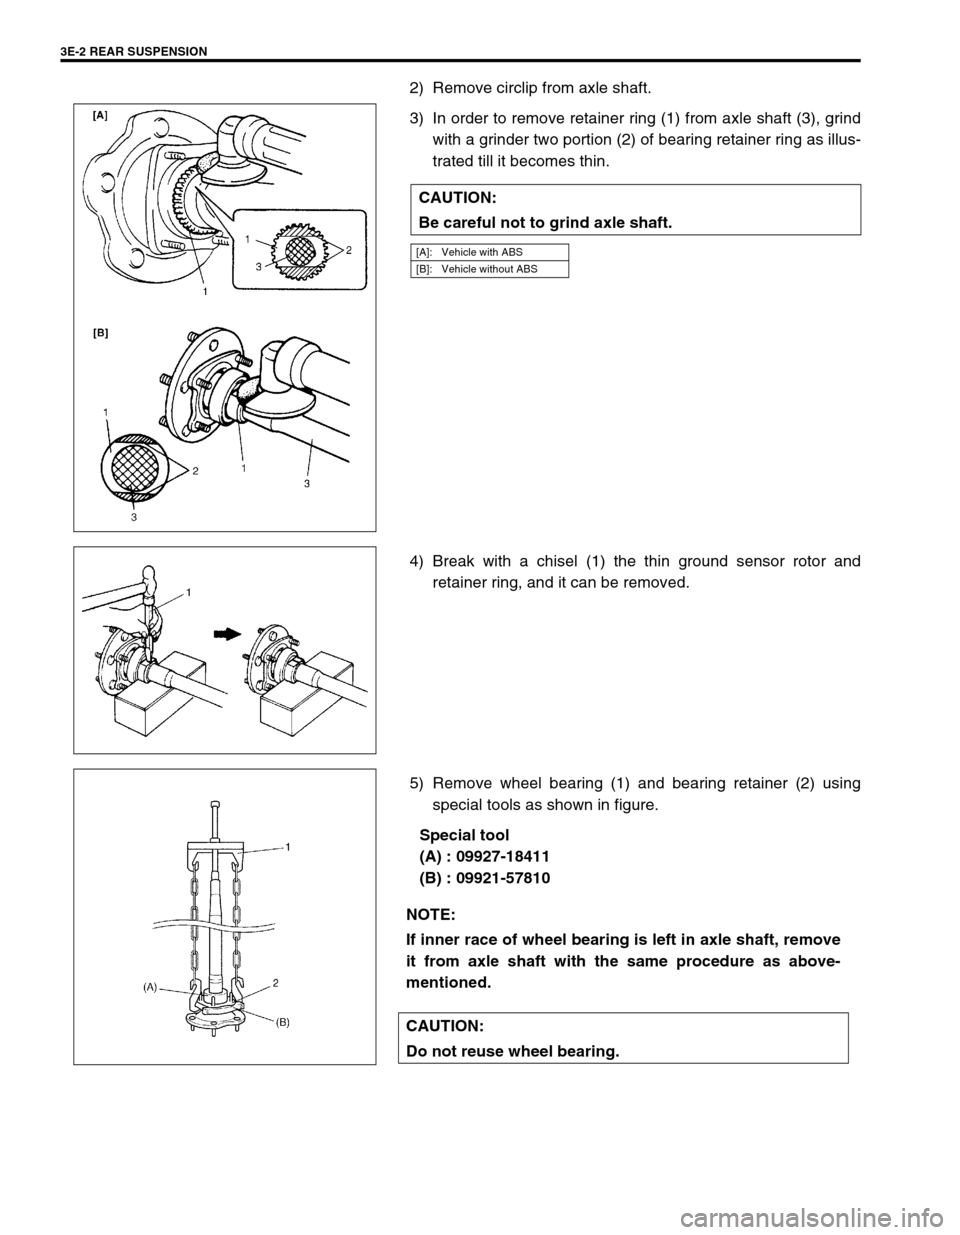 SUZUKI GRAND VITARA 2001 2.G Owners Manual 3E-2 REAR SUSPENSION
2) Remove circlip from axle shaft.
3) In order to remove retainer ring (1) from axle shaft (3), grind
with a grinder two portion (2) of bearing retainer ring as illus-
trated till